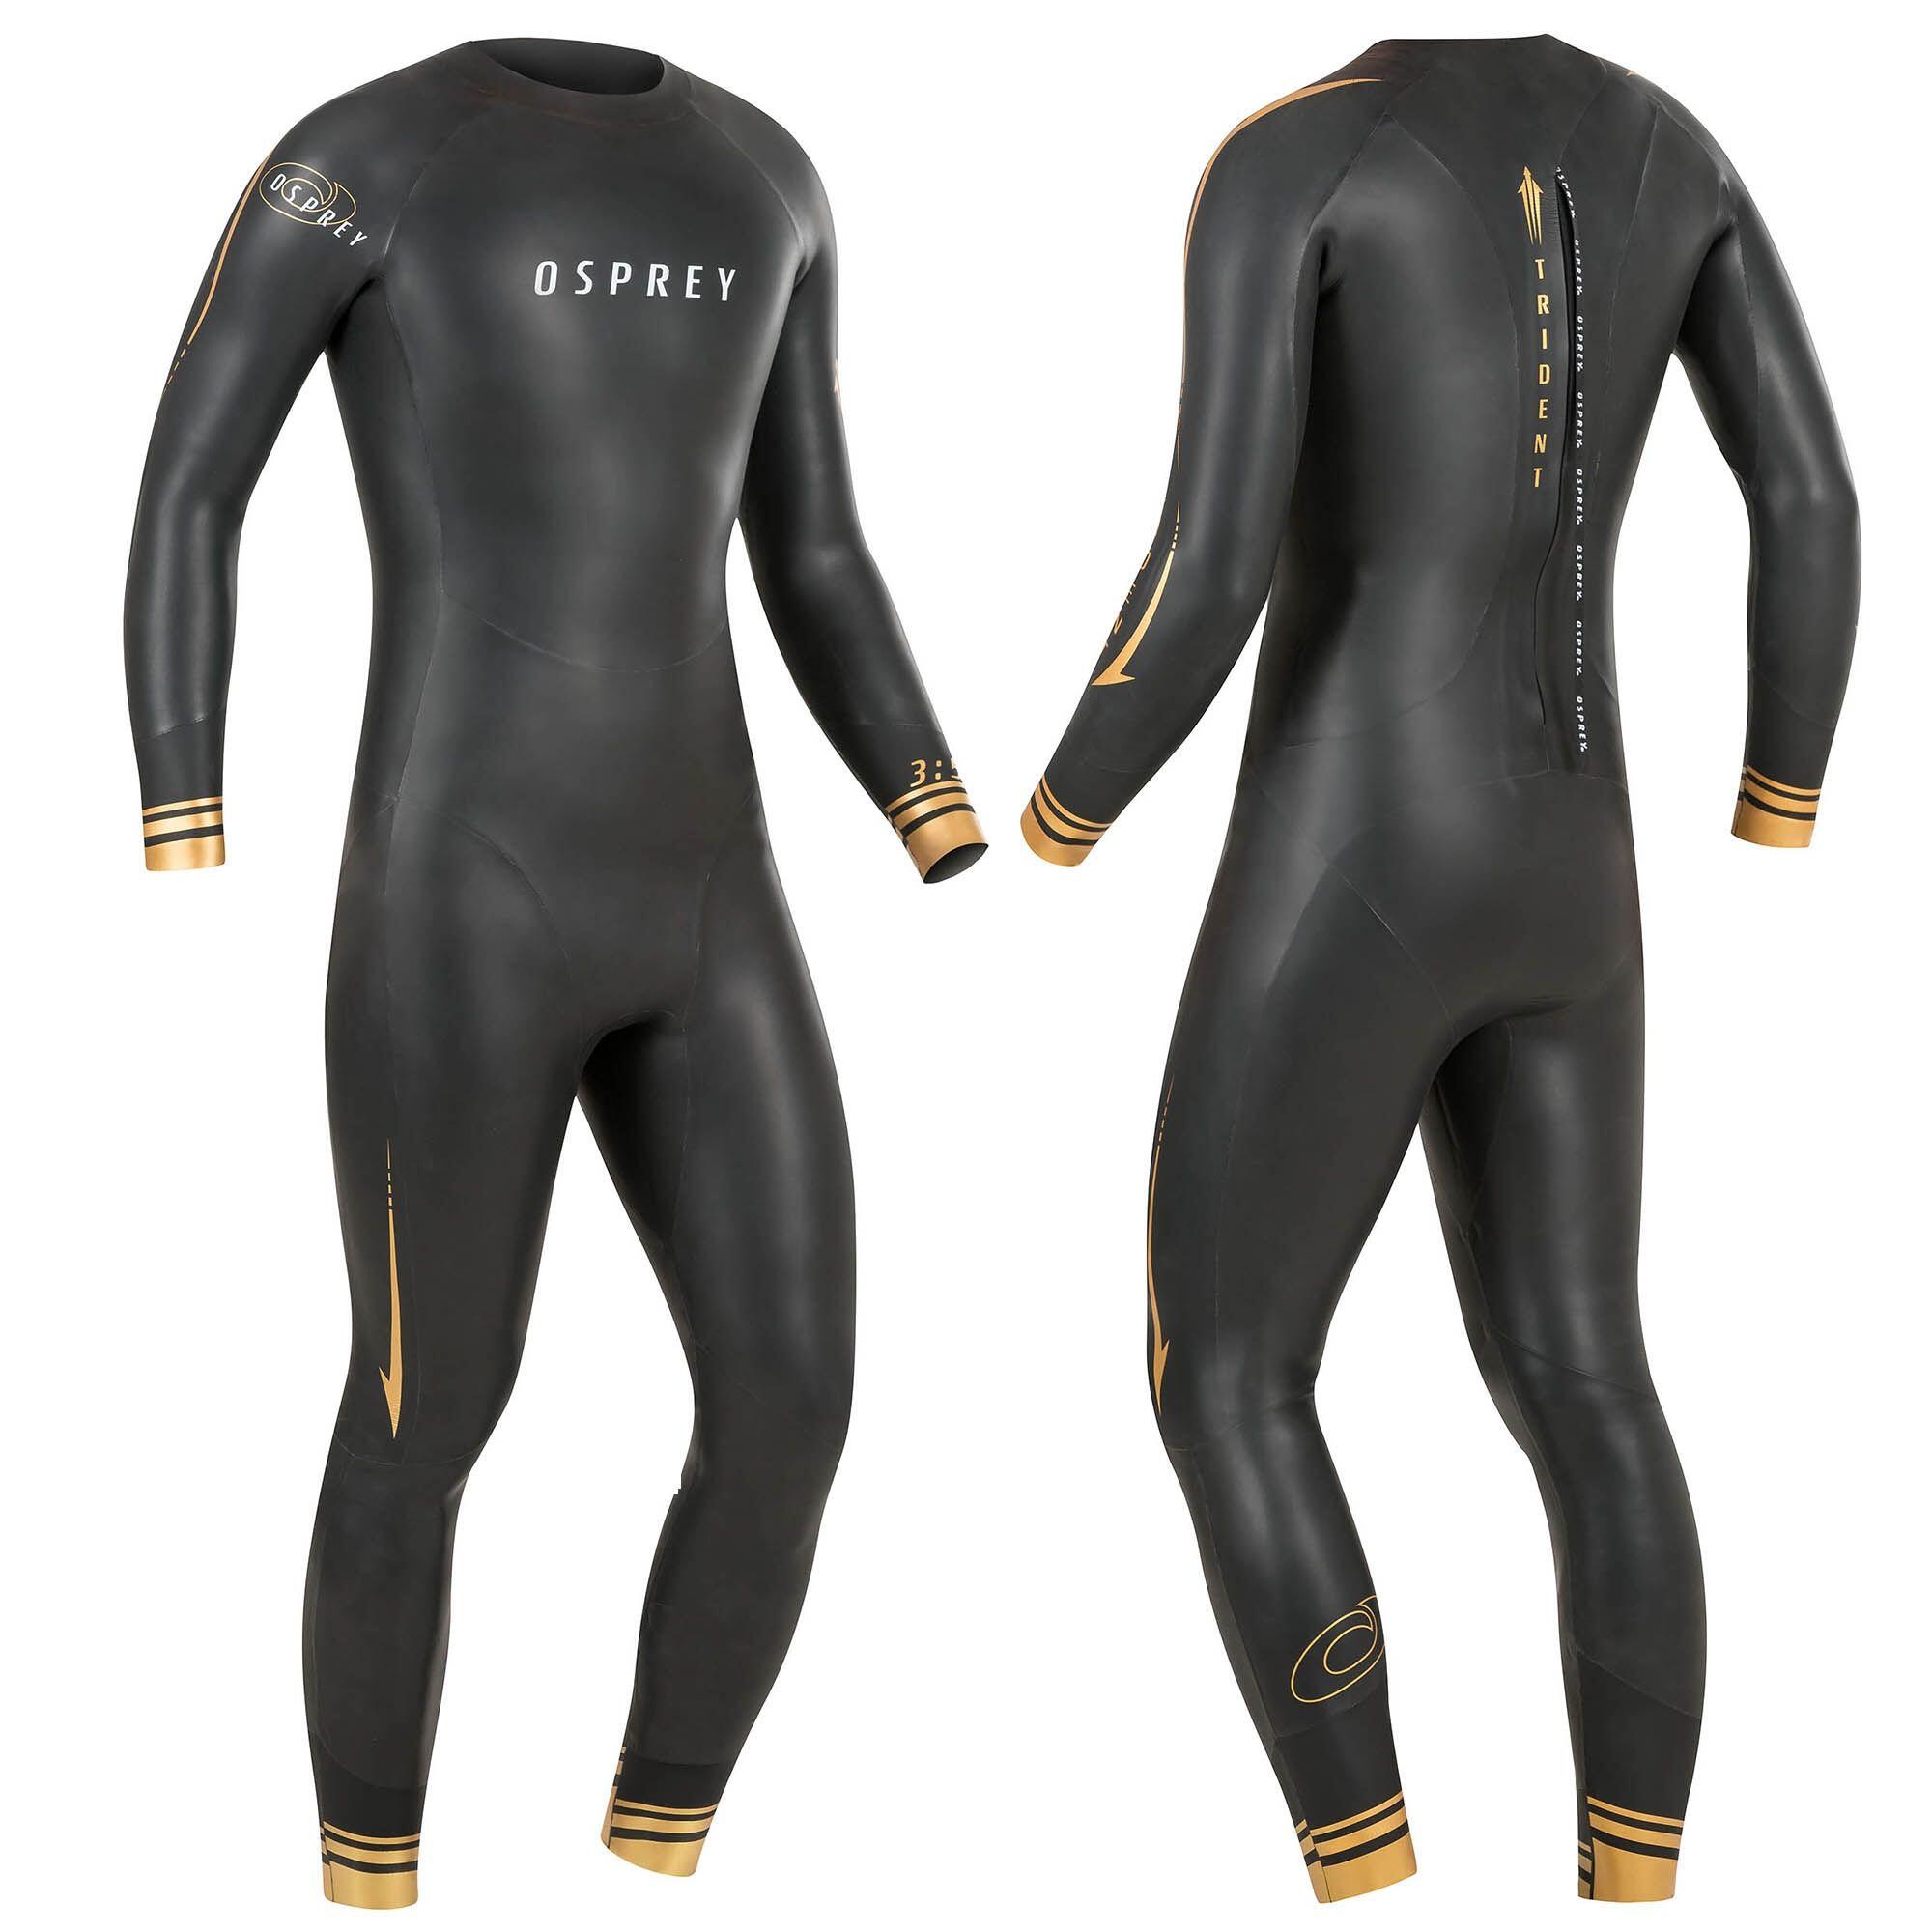 OSPREY ACTION SPORTS Osprey Men's Trident Tri-Suit 3mm Open Water Full Length Wetsuit